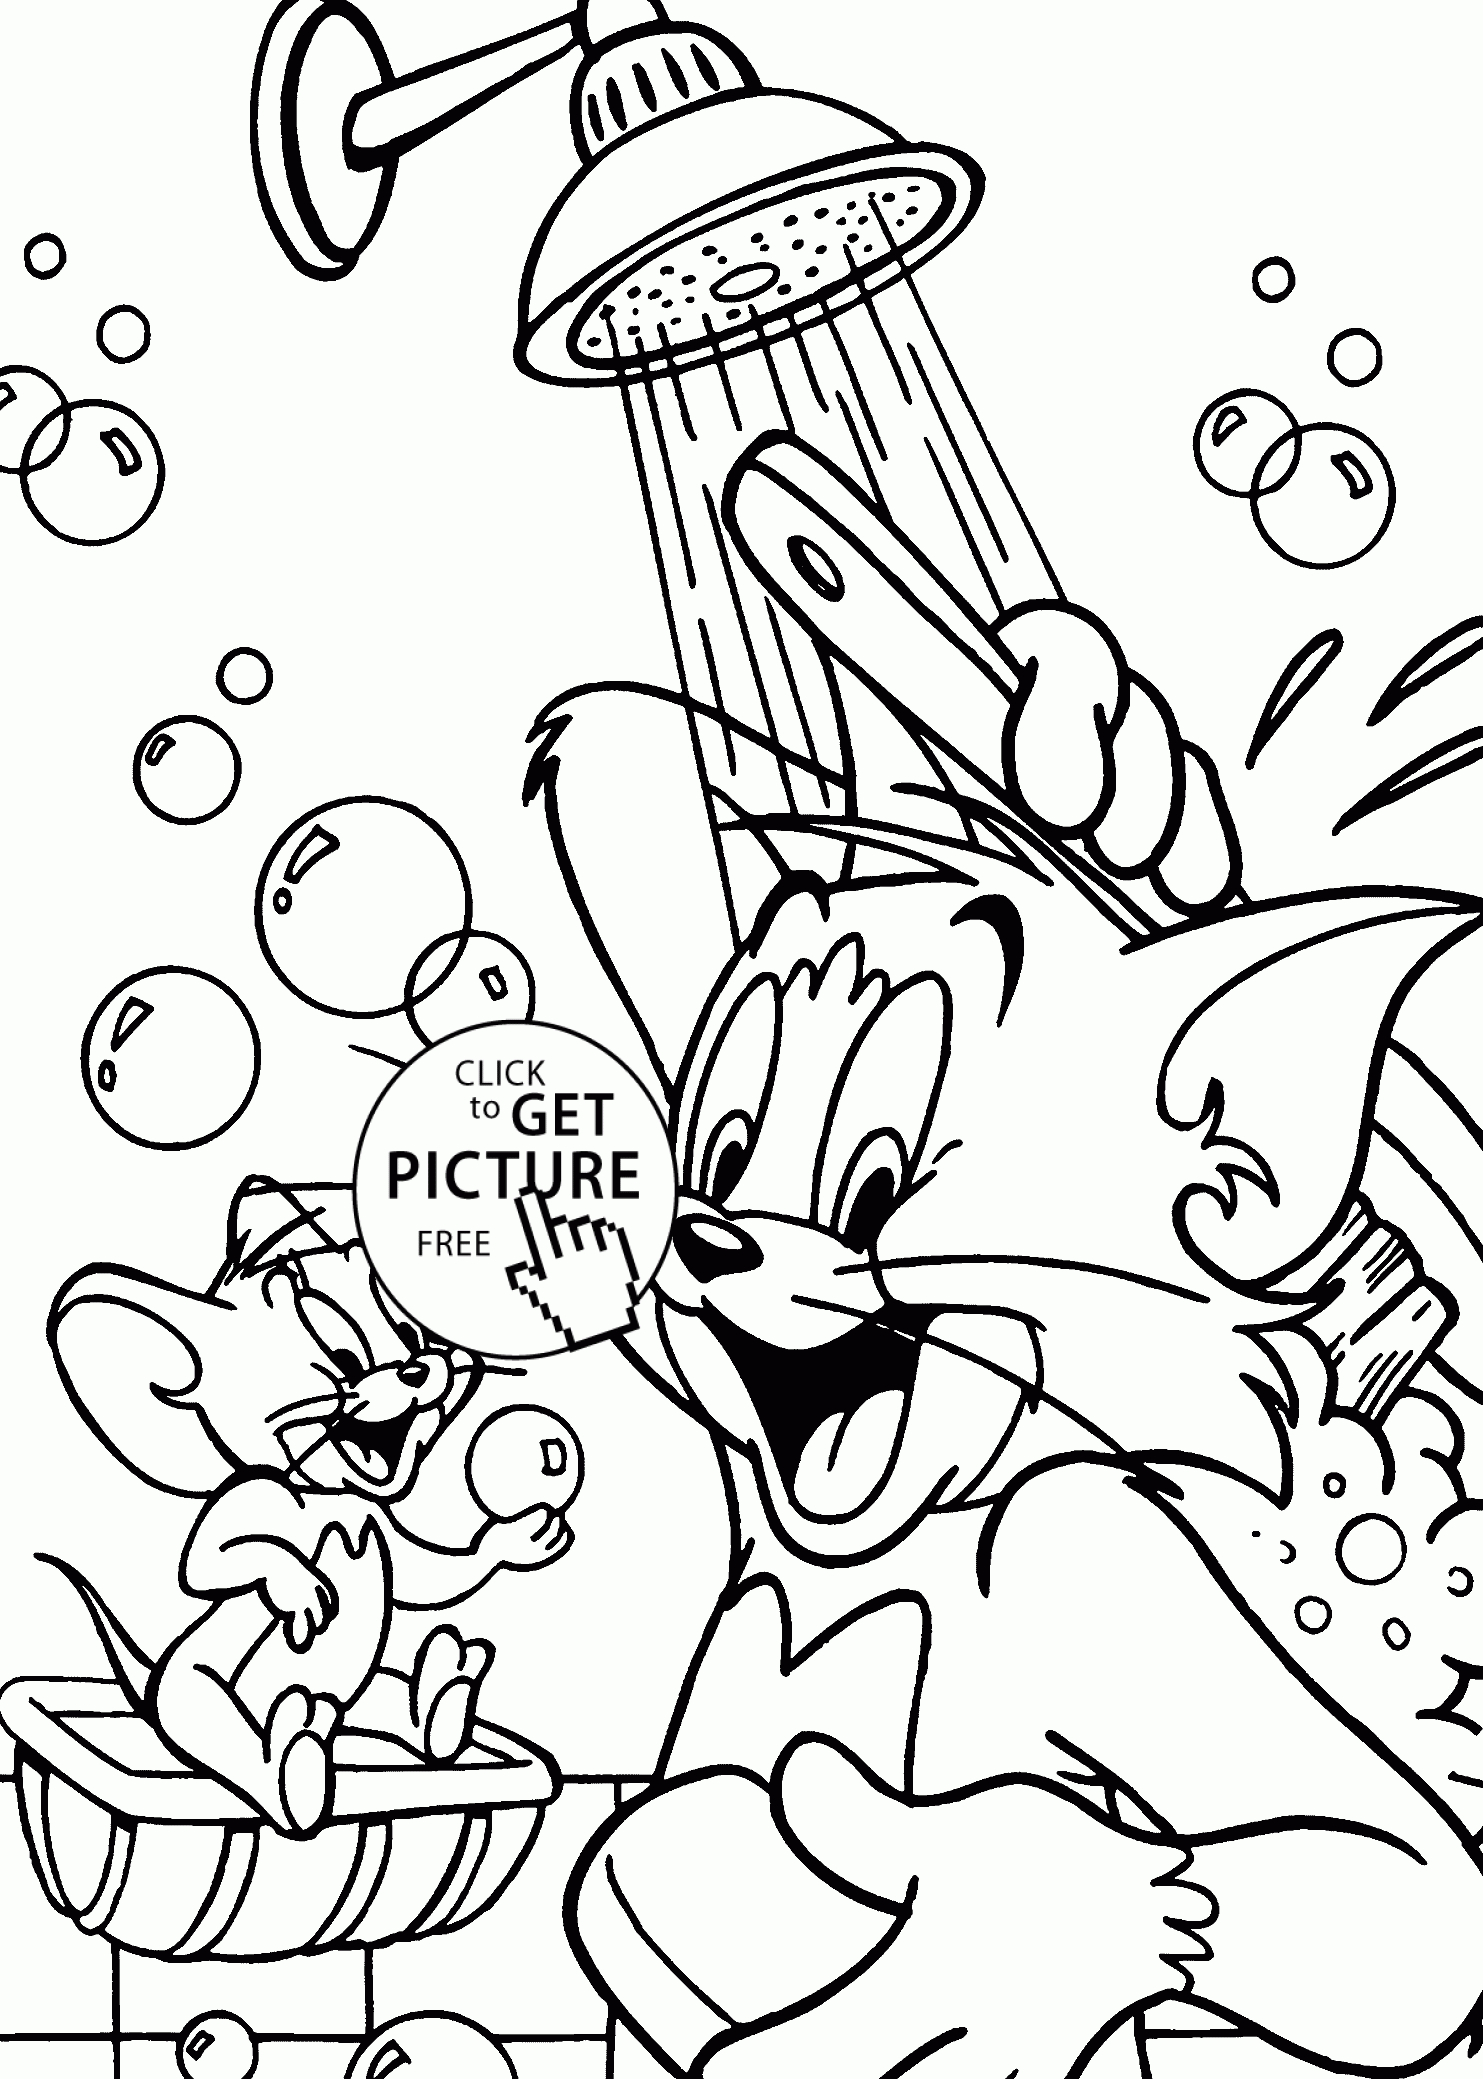 Tom And Jerry Shower Coloring Pages For Kids, Printable Free - Free Printable Tom And Jerry Coloring Pages